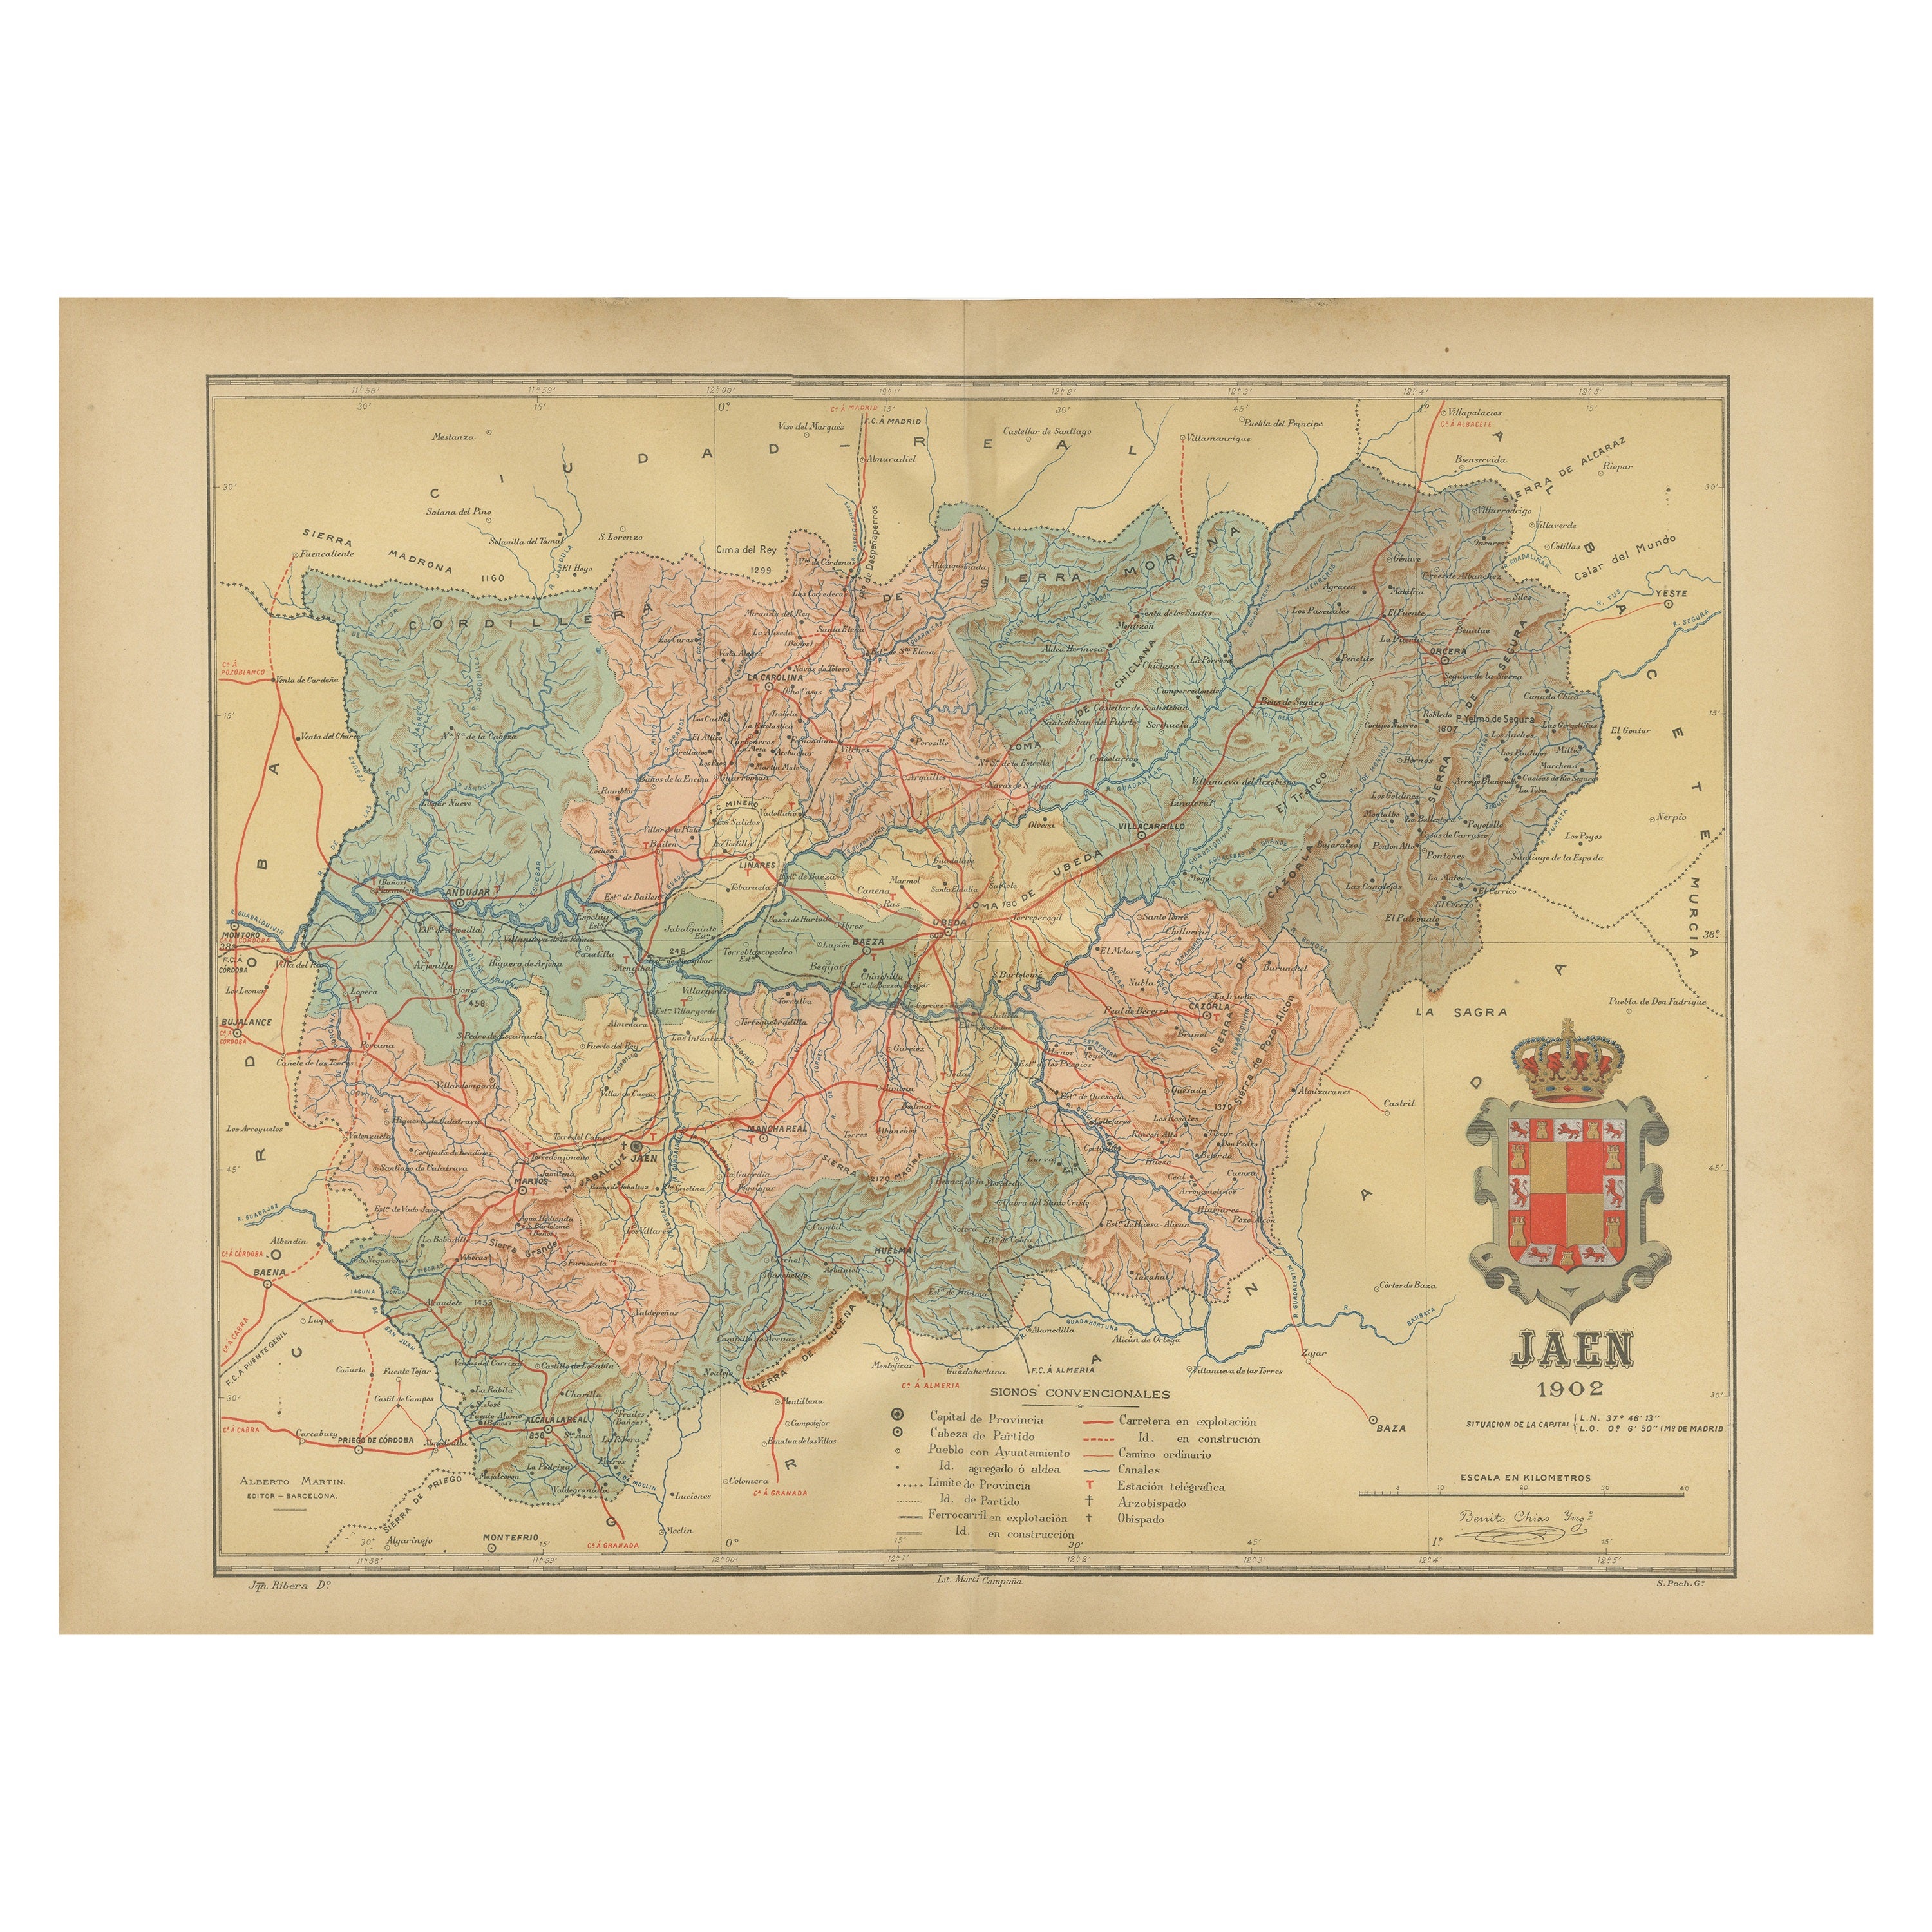 Jaén 1902: A Cartographic Depiction of Andalusia's Olive Heartland For Sale